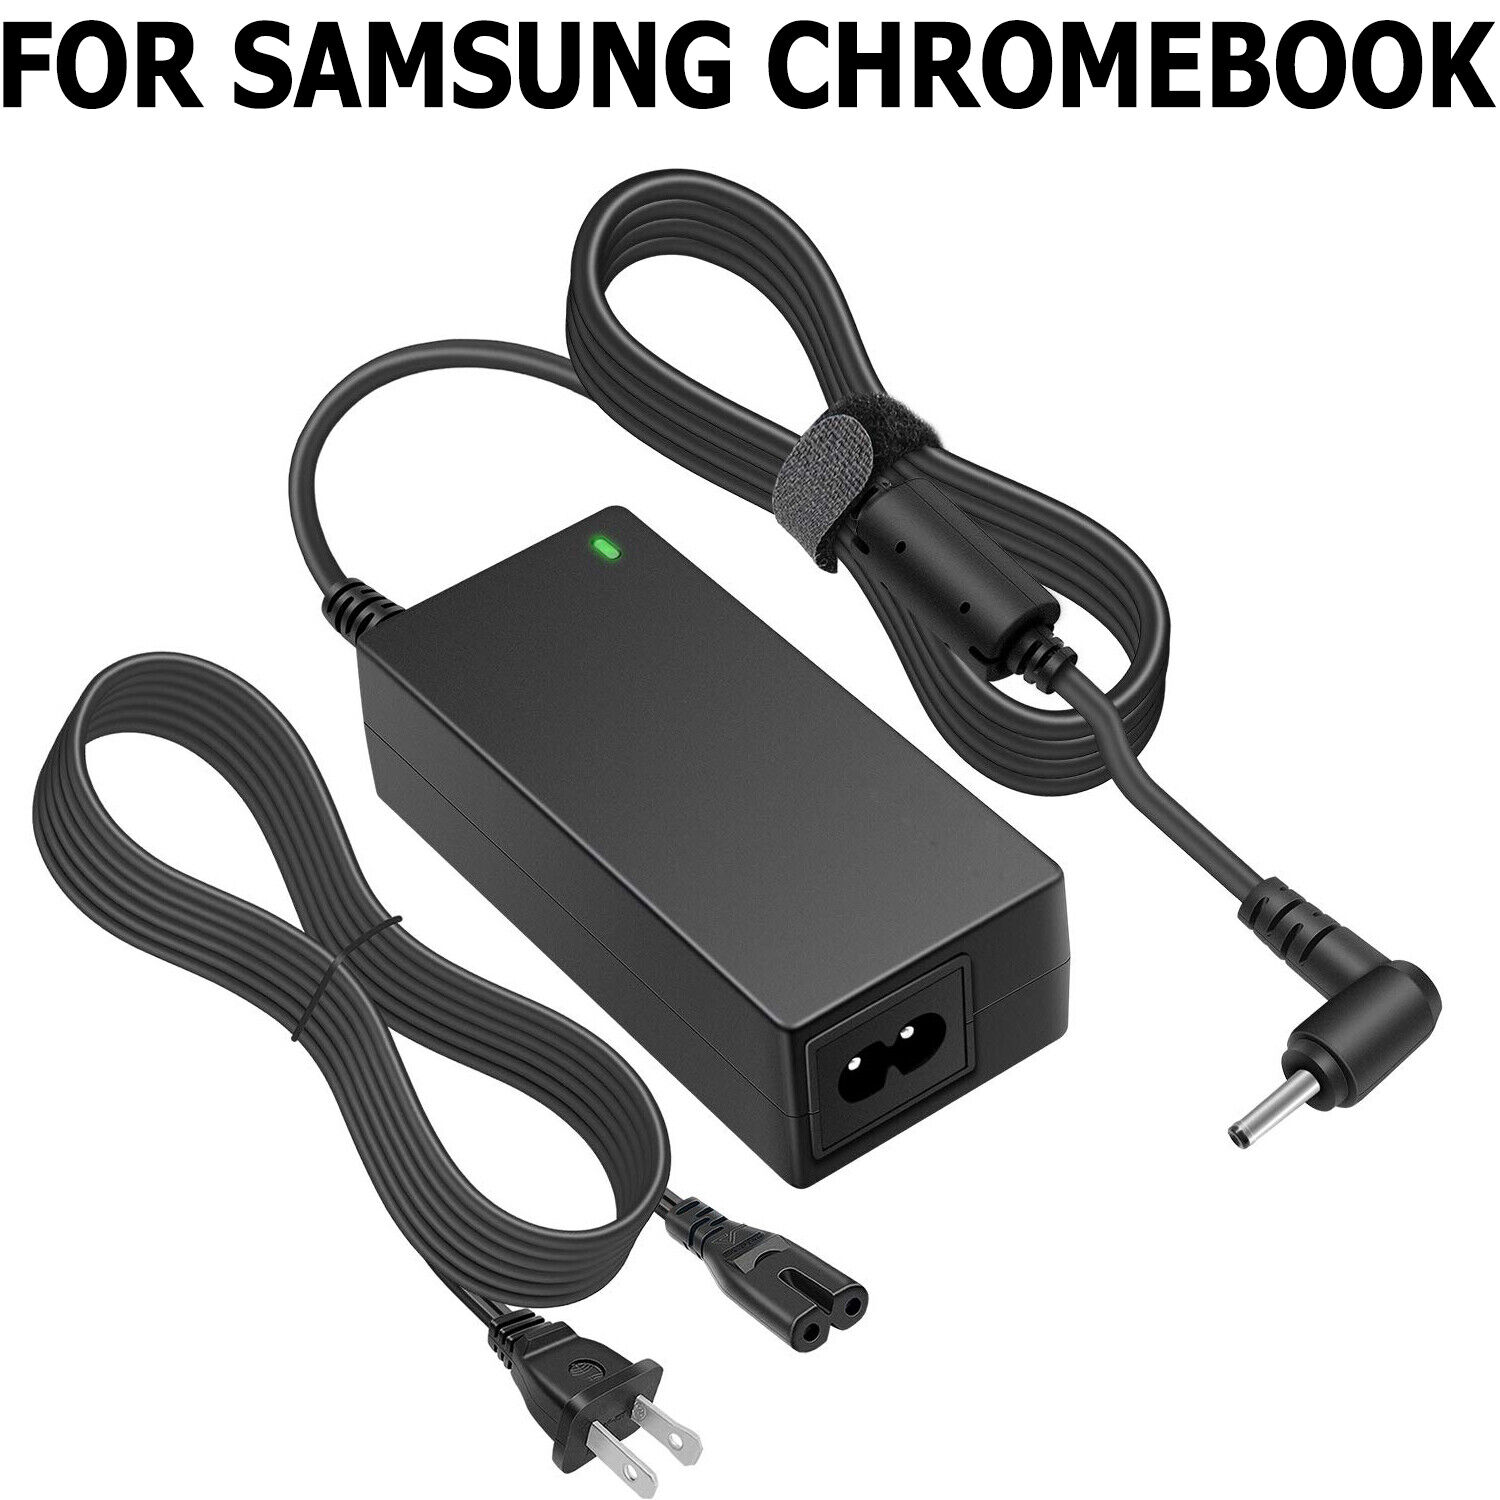 40W 12V 3.33A Ac Laptop Charger for Samsung Charging Cord for Chromebook Laptop